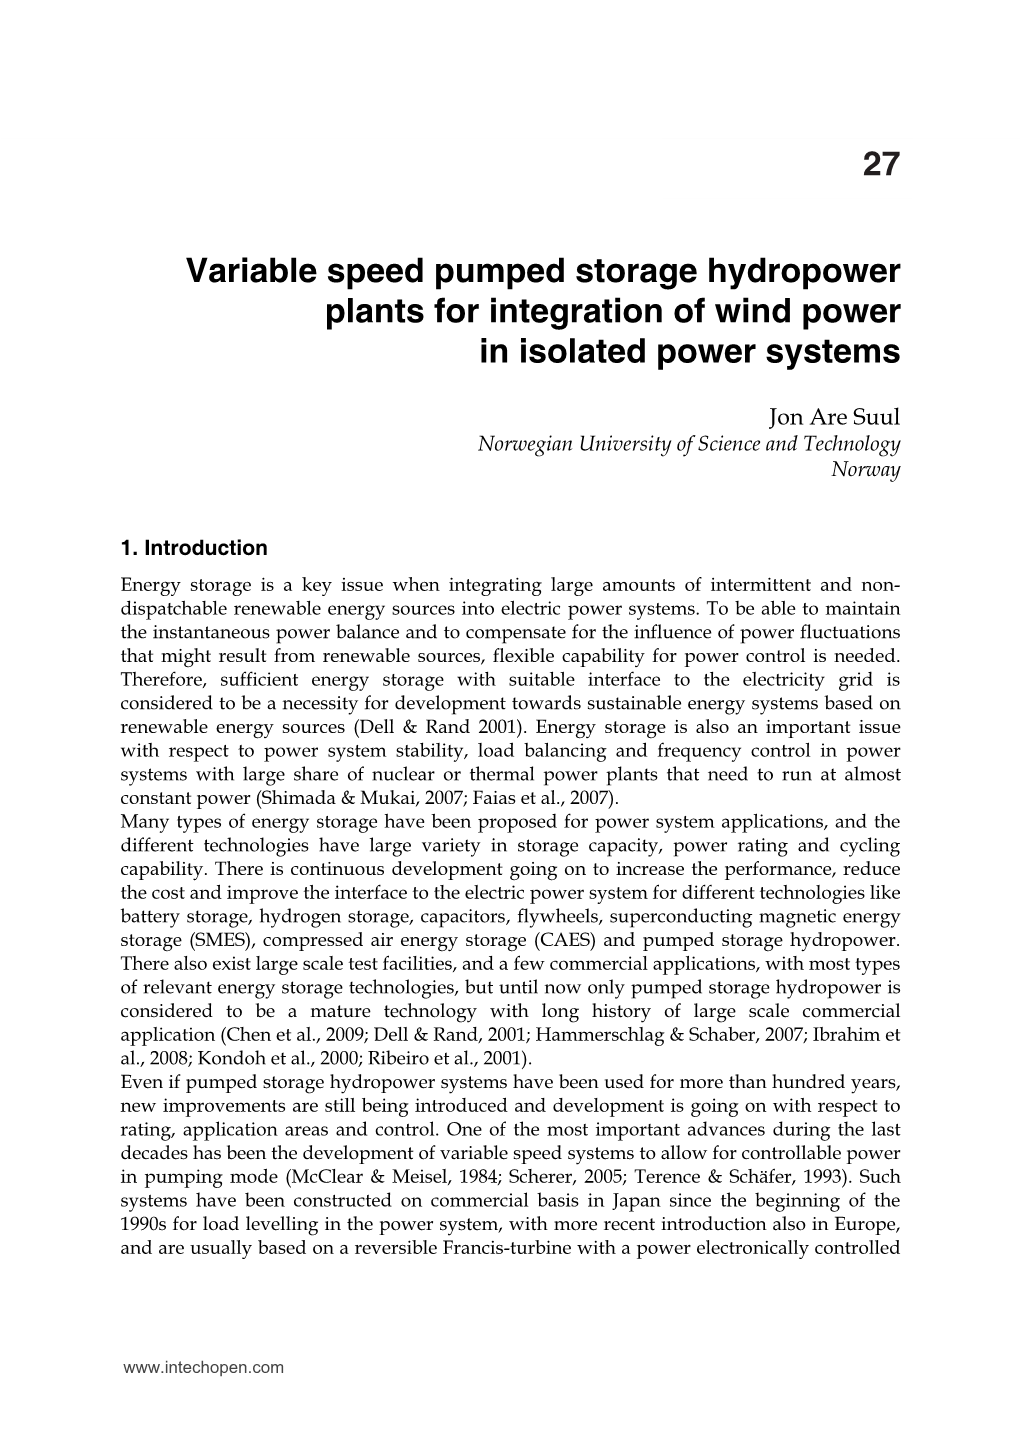 Variable Speed Pumped Storage Hydropower Plants for Integration of Wind Power in Isolated Power Systems 553